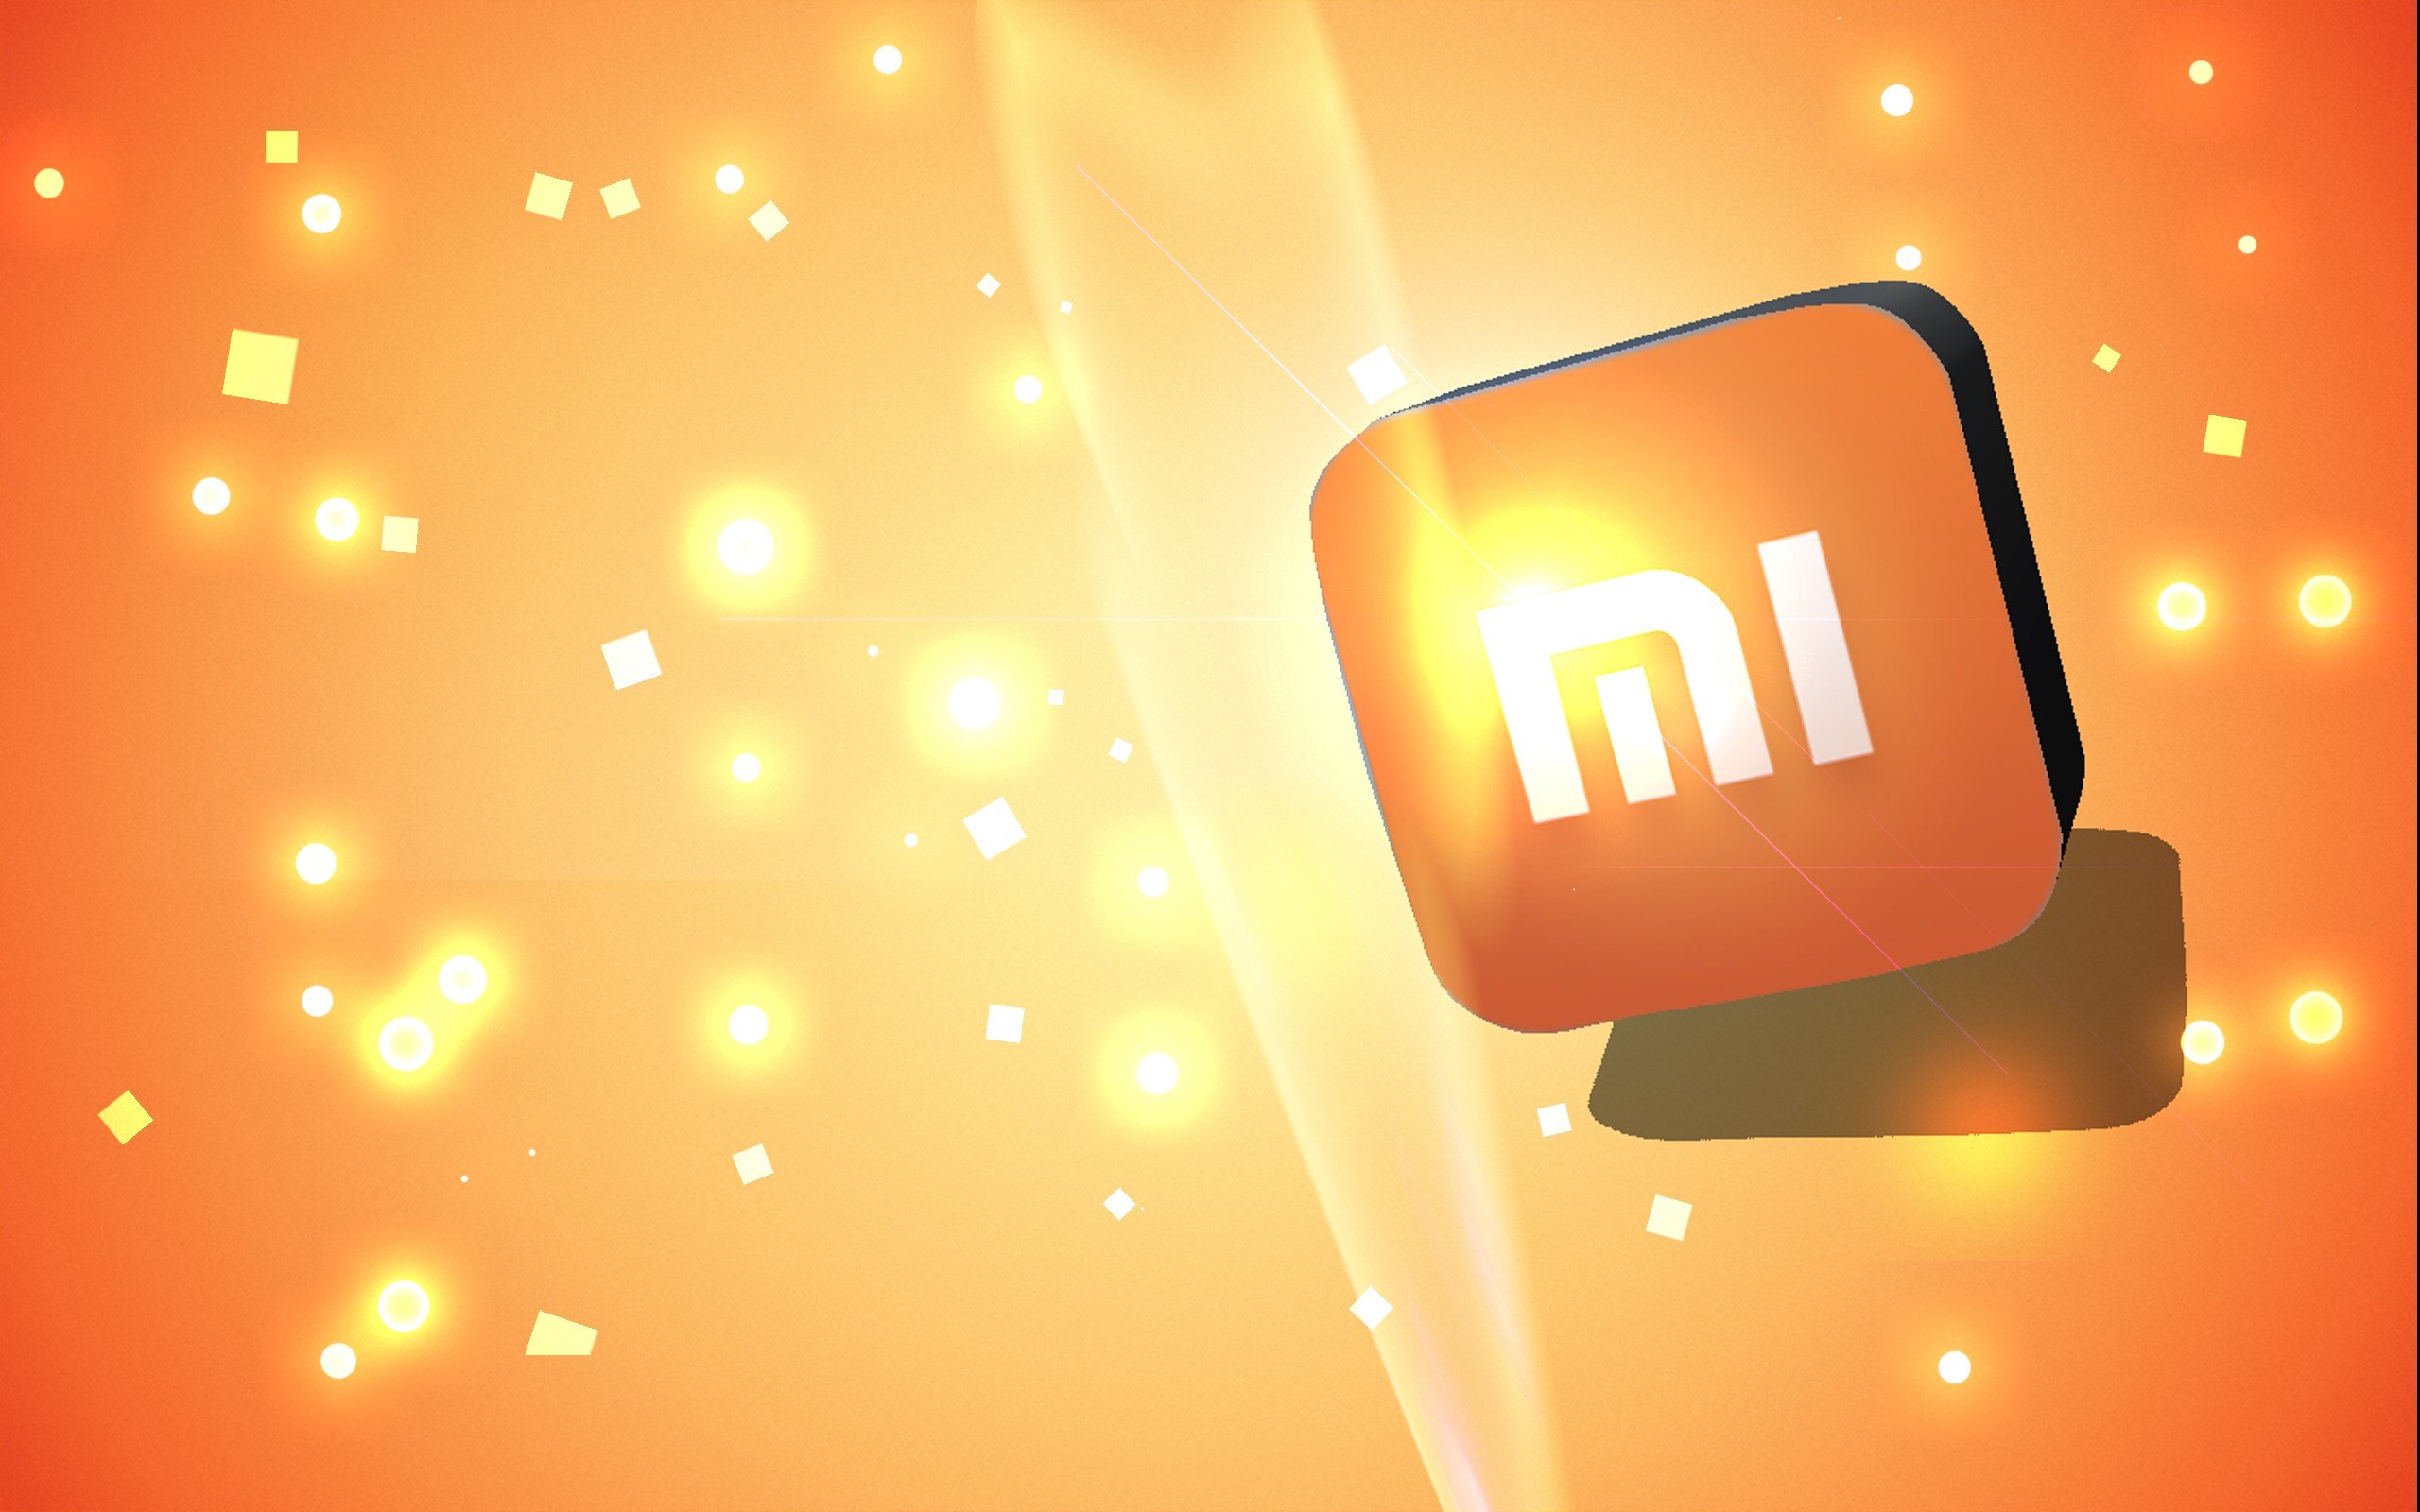  xiaomi  HD  Wallpapers  Desktop and Mobile Images Photos